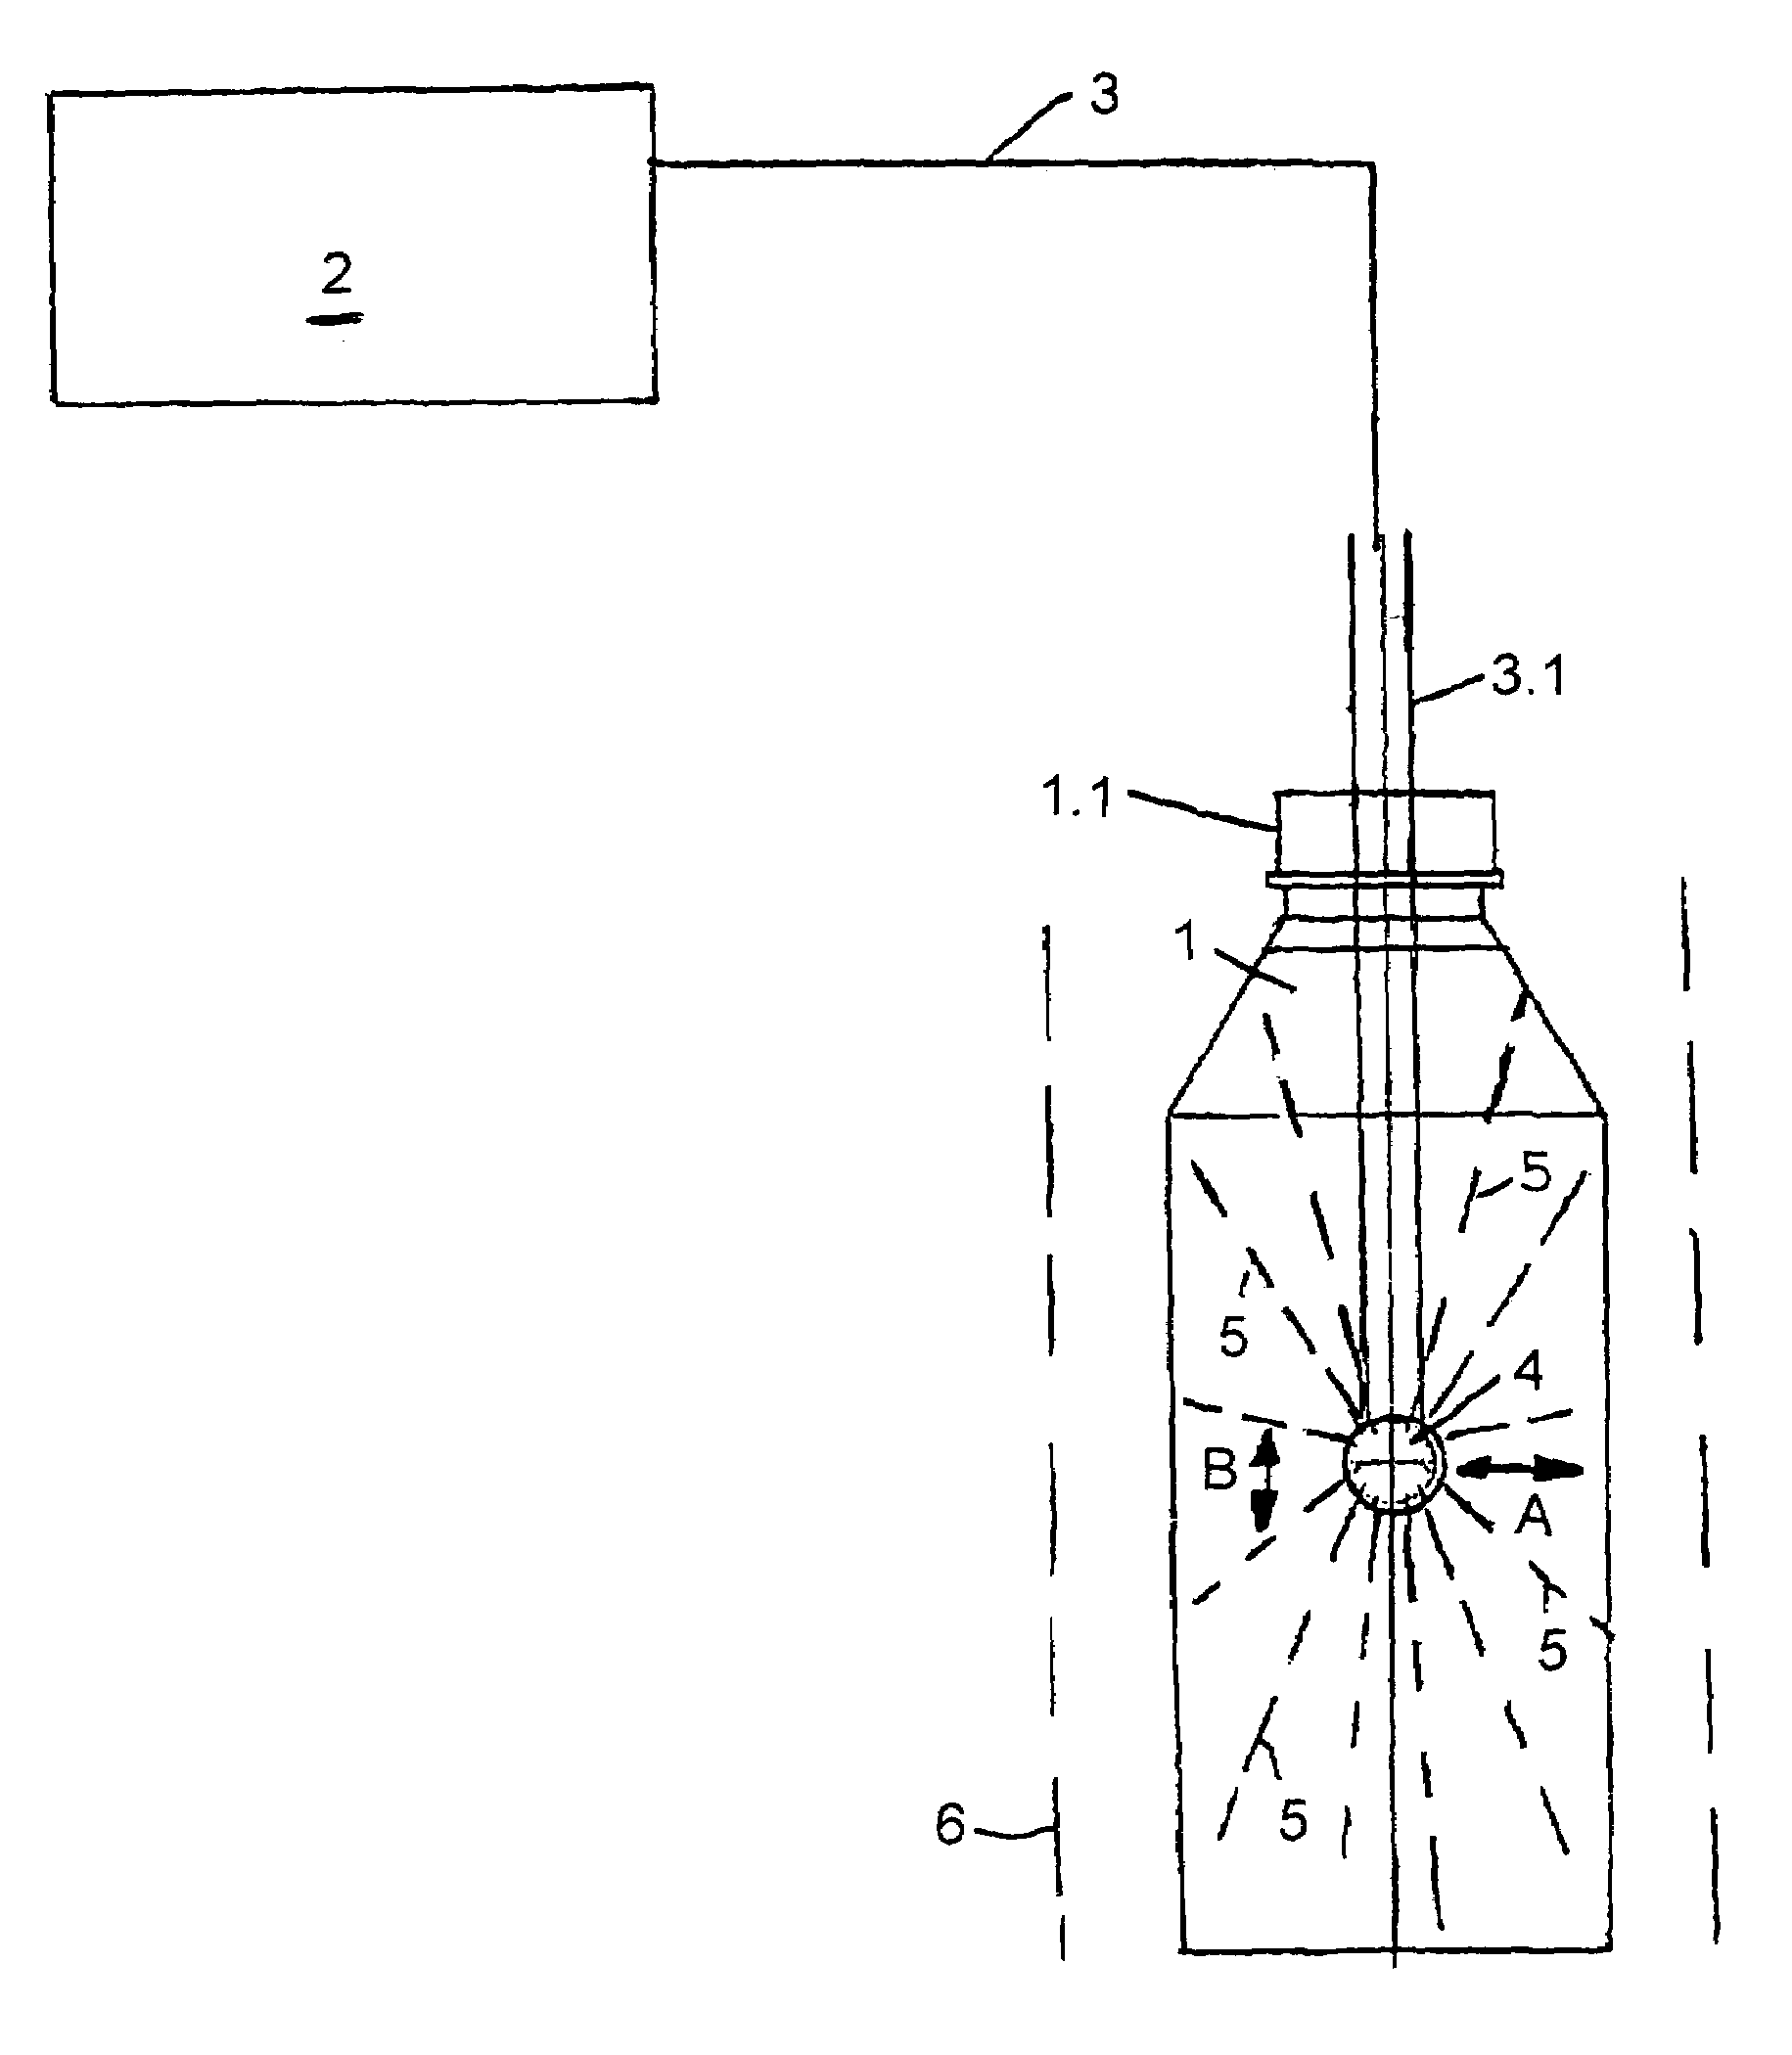 Beverage bottling plant for filling bottles with a liquid beverage material having a device to treat bottles and a method of treating bottles with said device